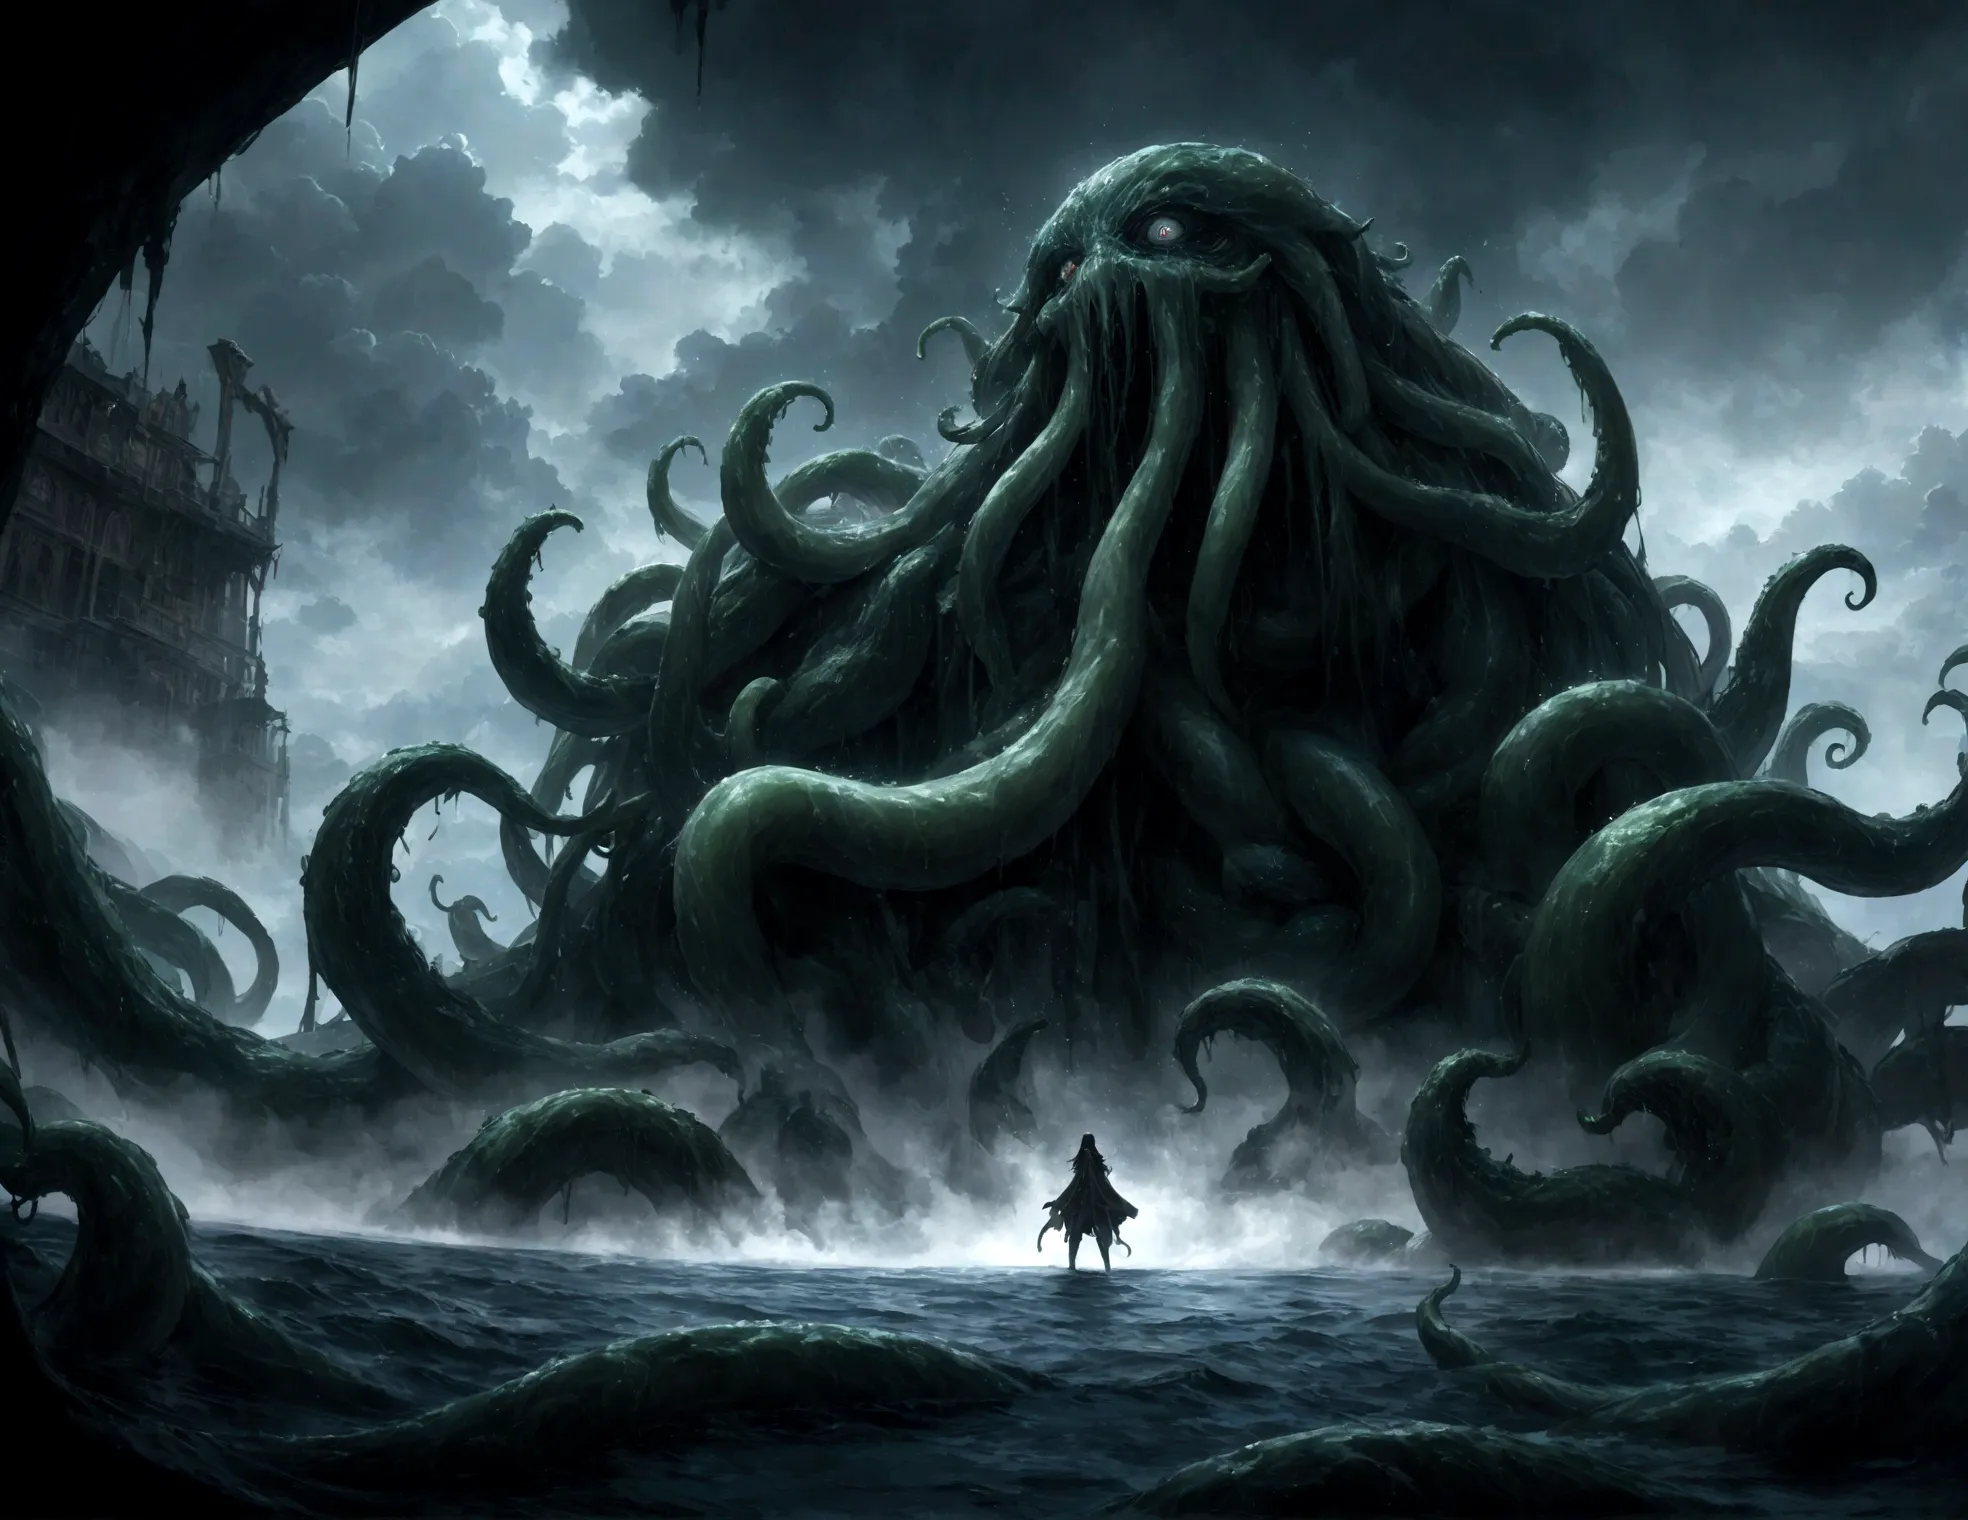 A dark fantasy scene depicting the terrifying creature Cthulhu,emerging from the abyss. The monstrous figure,shrouded in shadows...